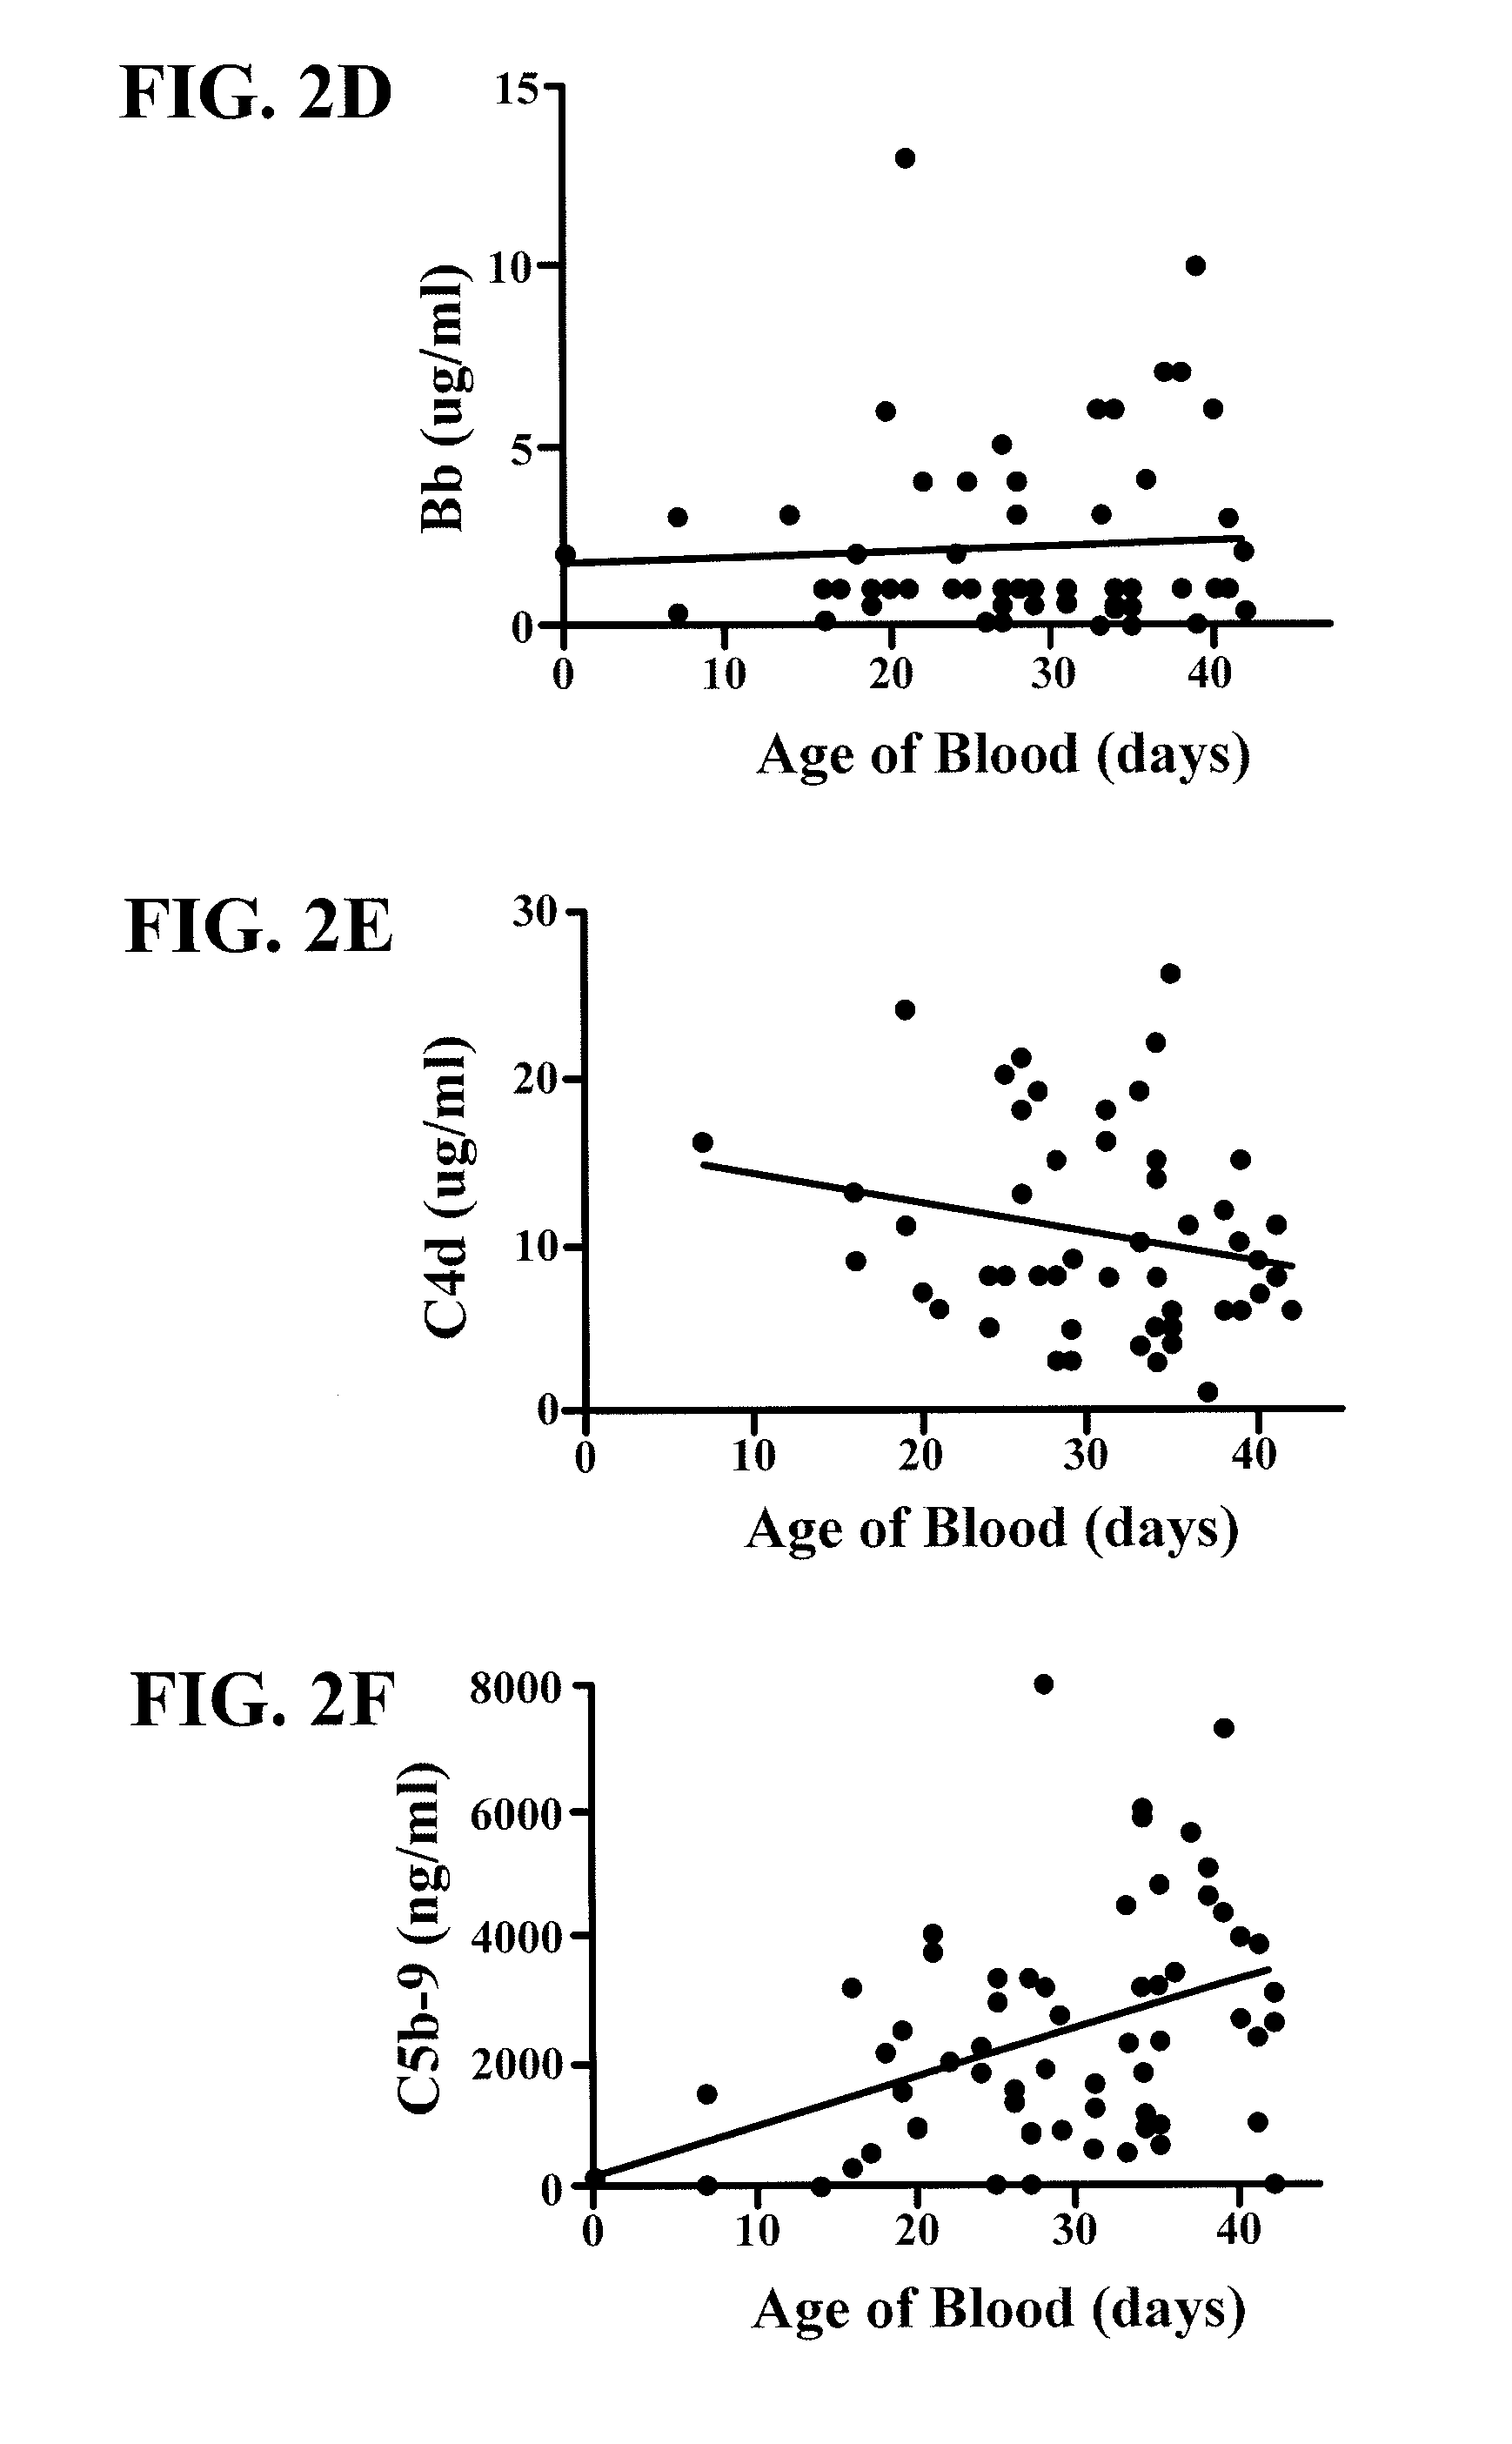 Anti-complement therapy compositions and methods for preserving stored blood